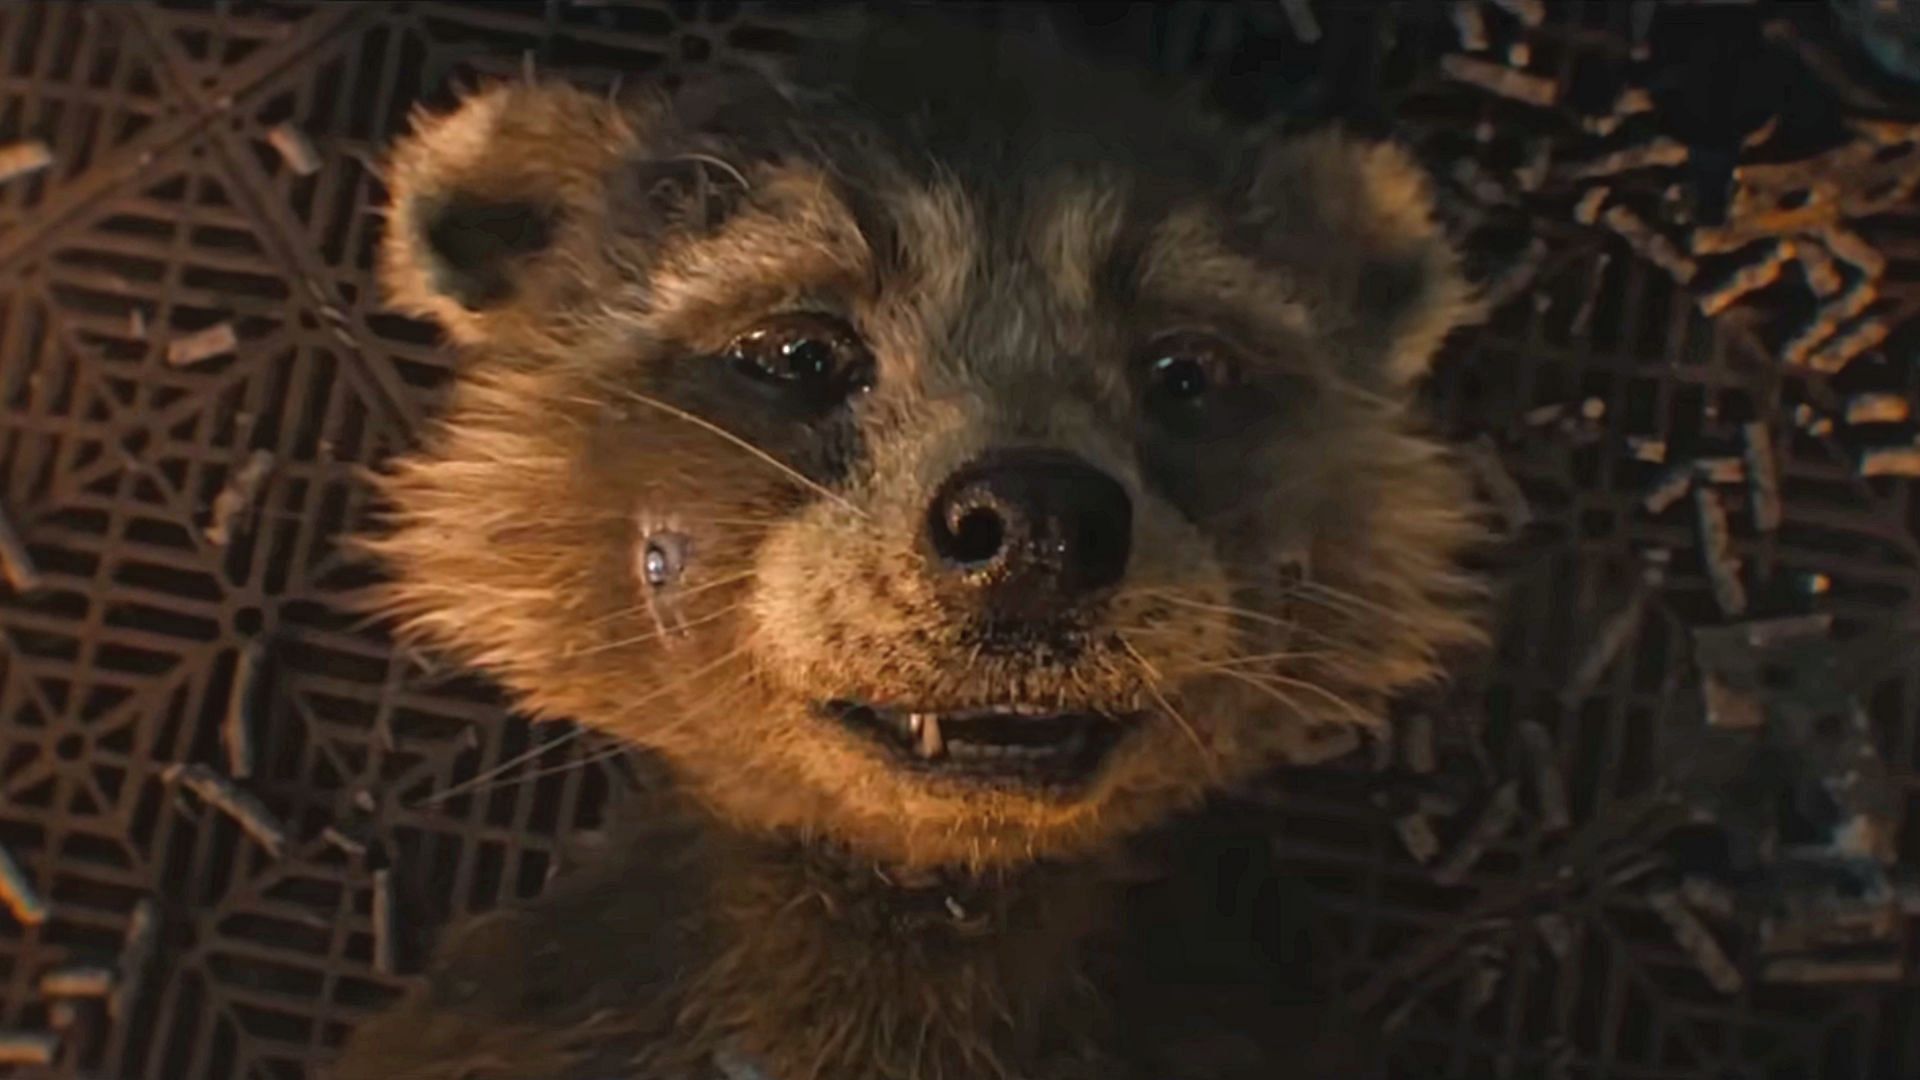 Will Rocket die in Guardians of the Galaxy Vol. 3?